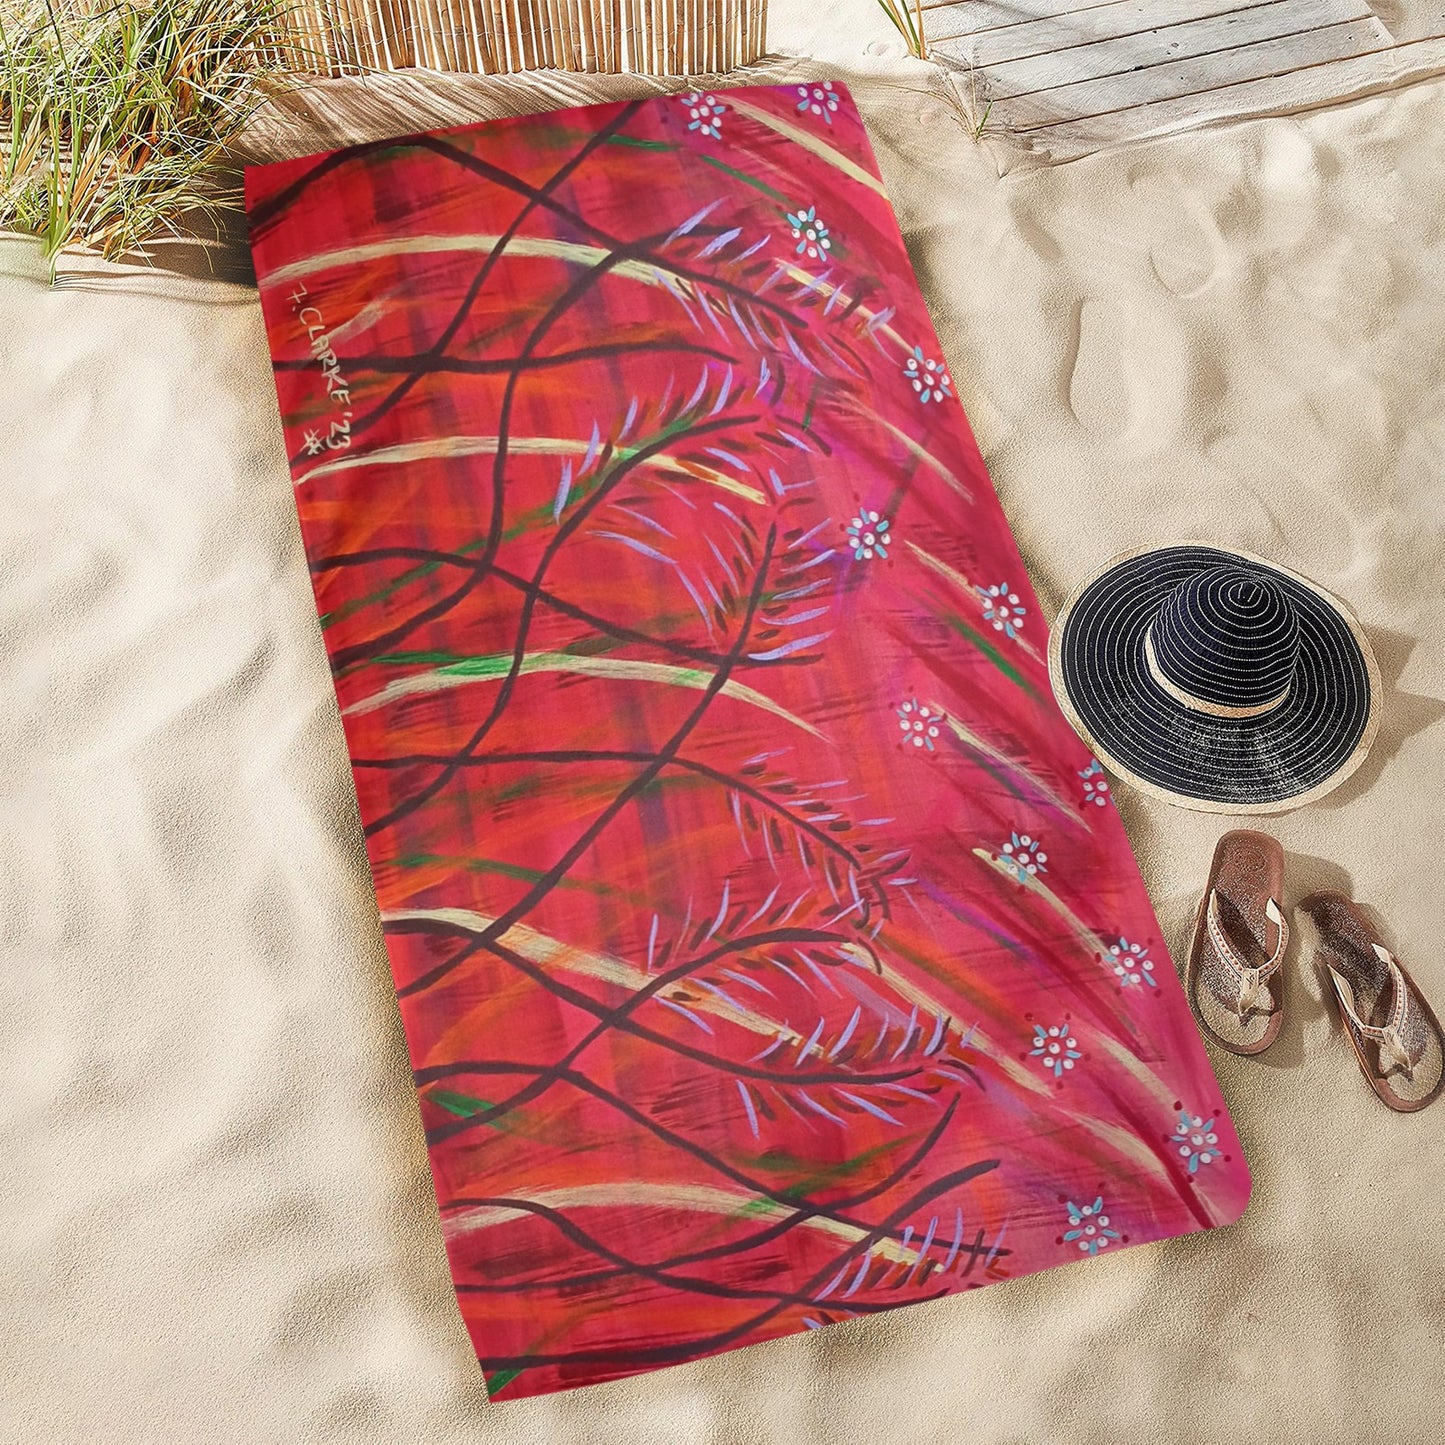 Grasses at Night FCD Beach Towel 31"x71"(NEW)(Made in AUS)